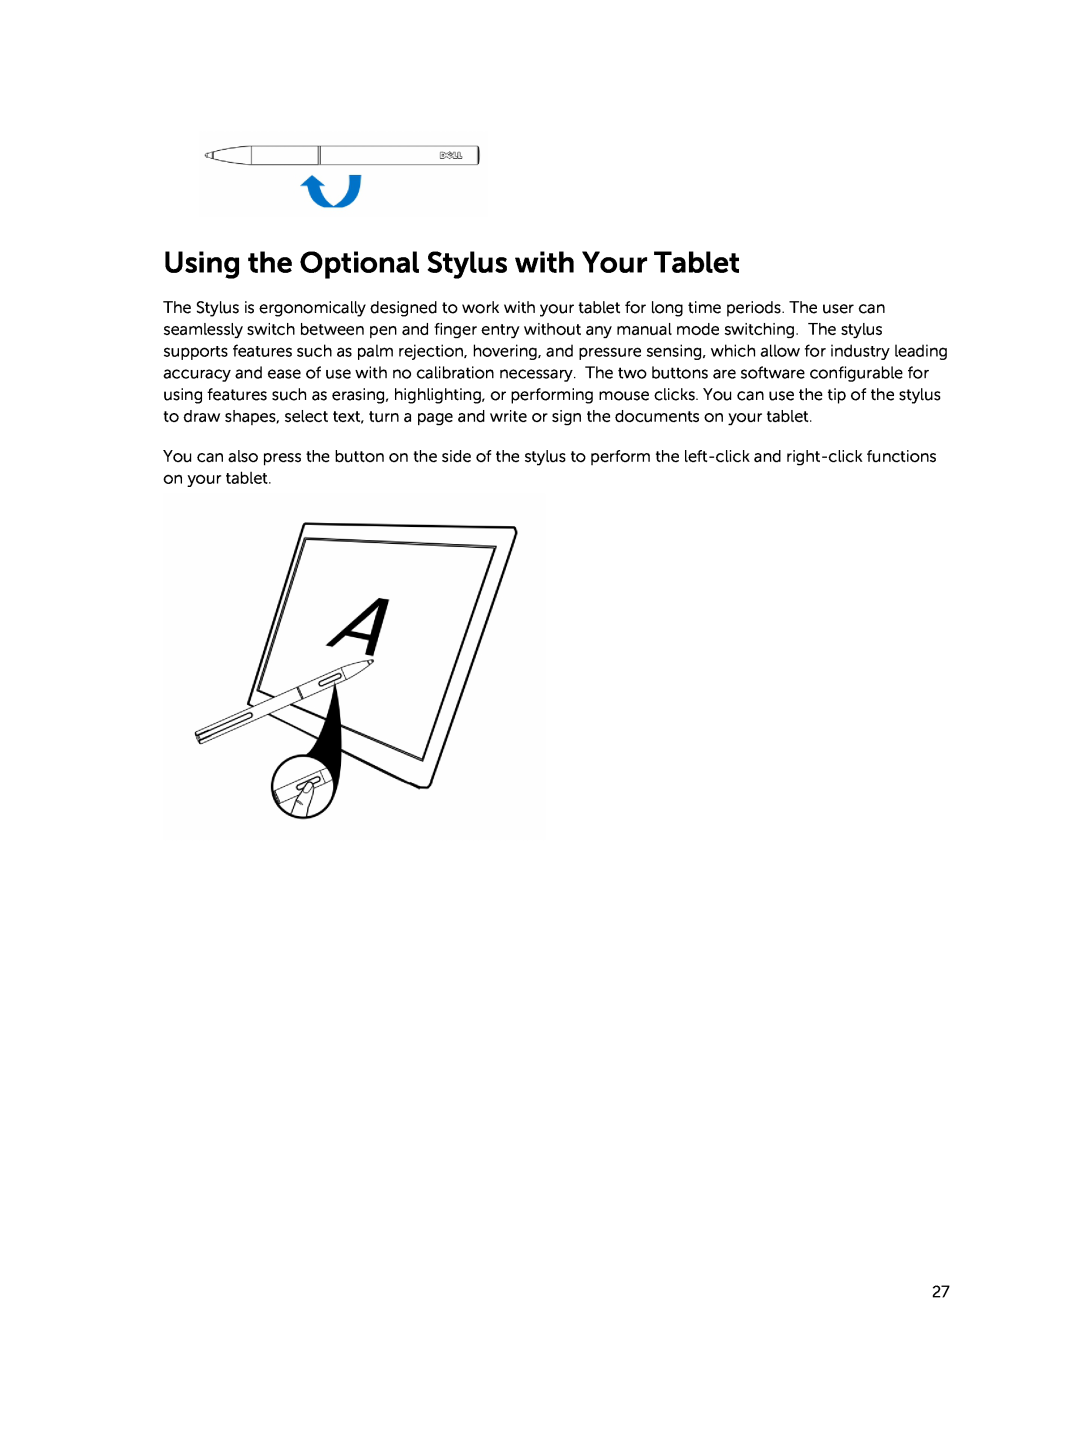 Dell T07G manual Using the Optional Stylus with Your Tablet 